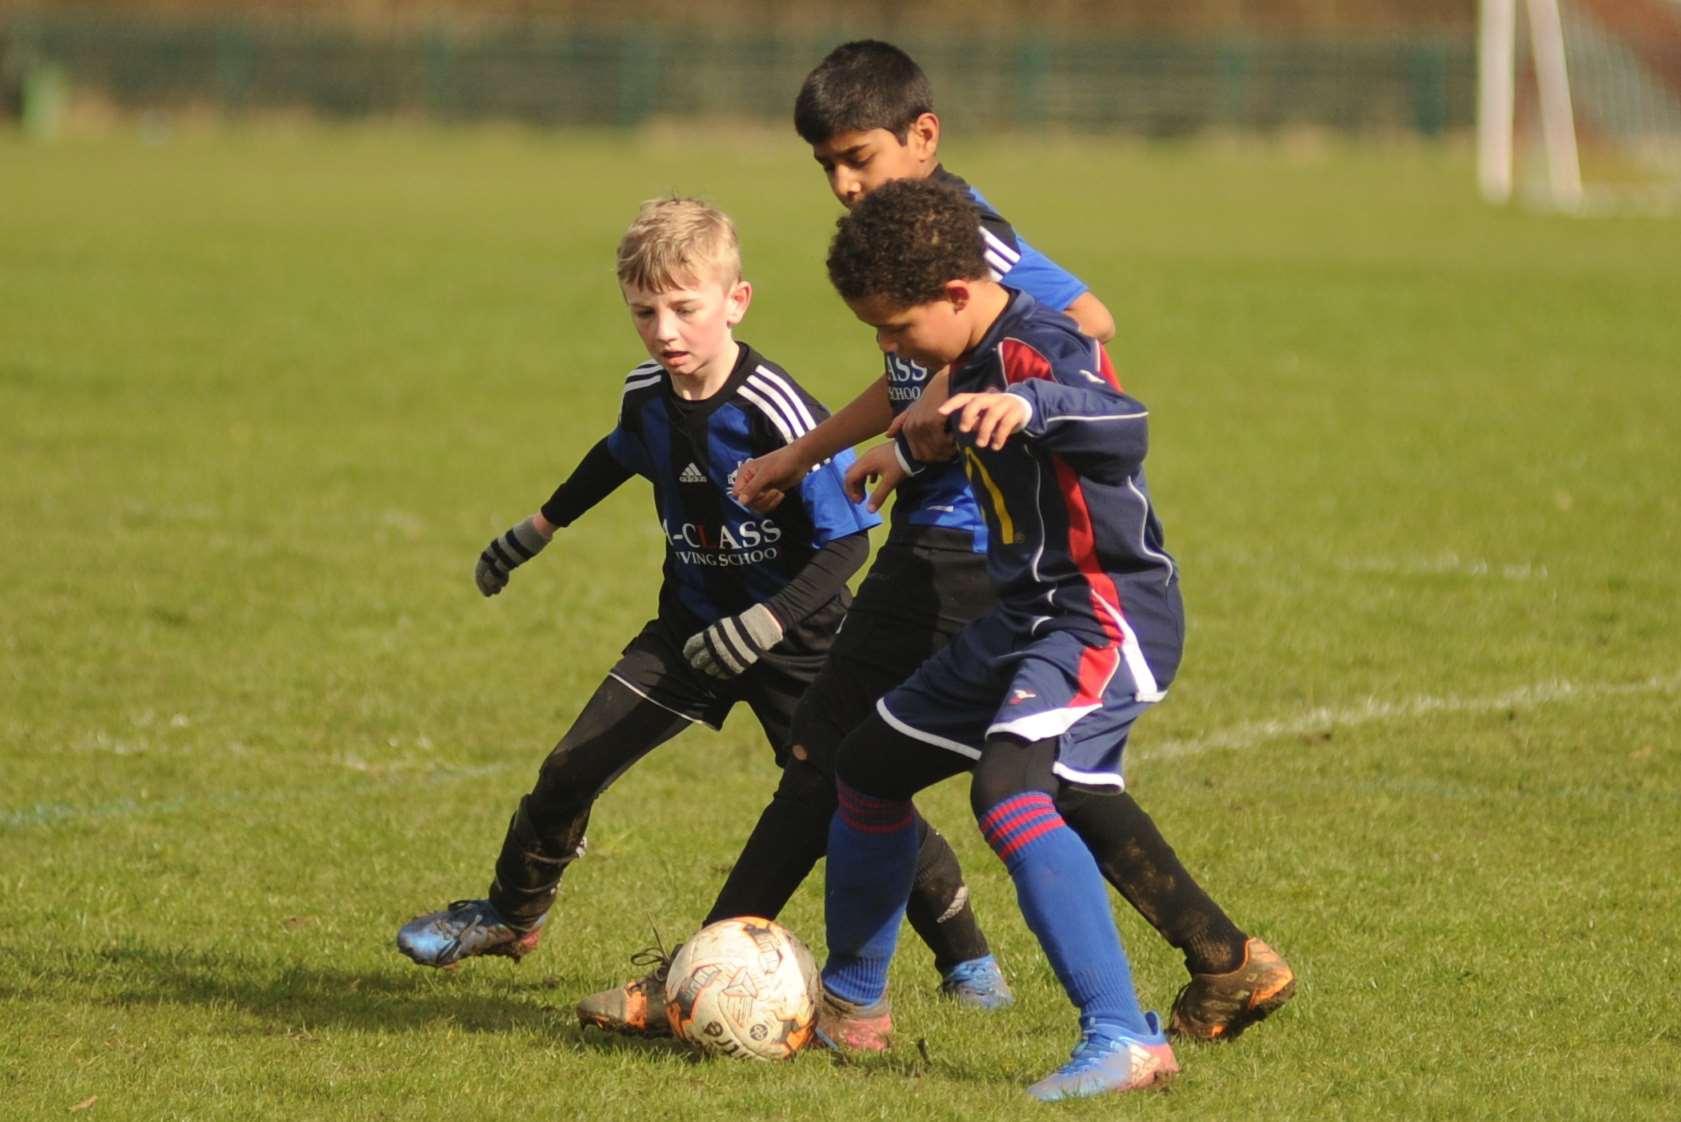 Omega 92 and Woodpecker HI under-10s battle it out Picture: Steve Crispe